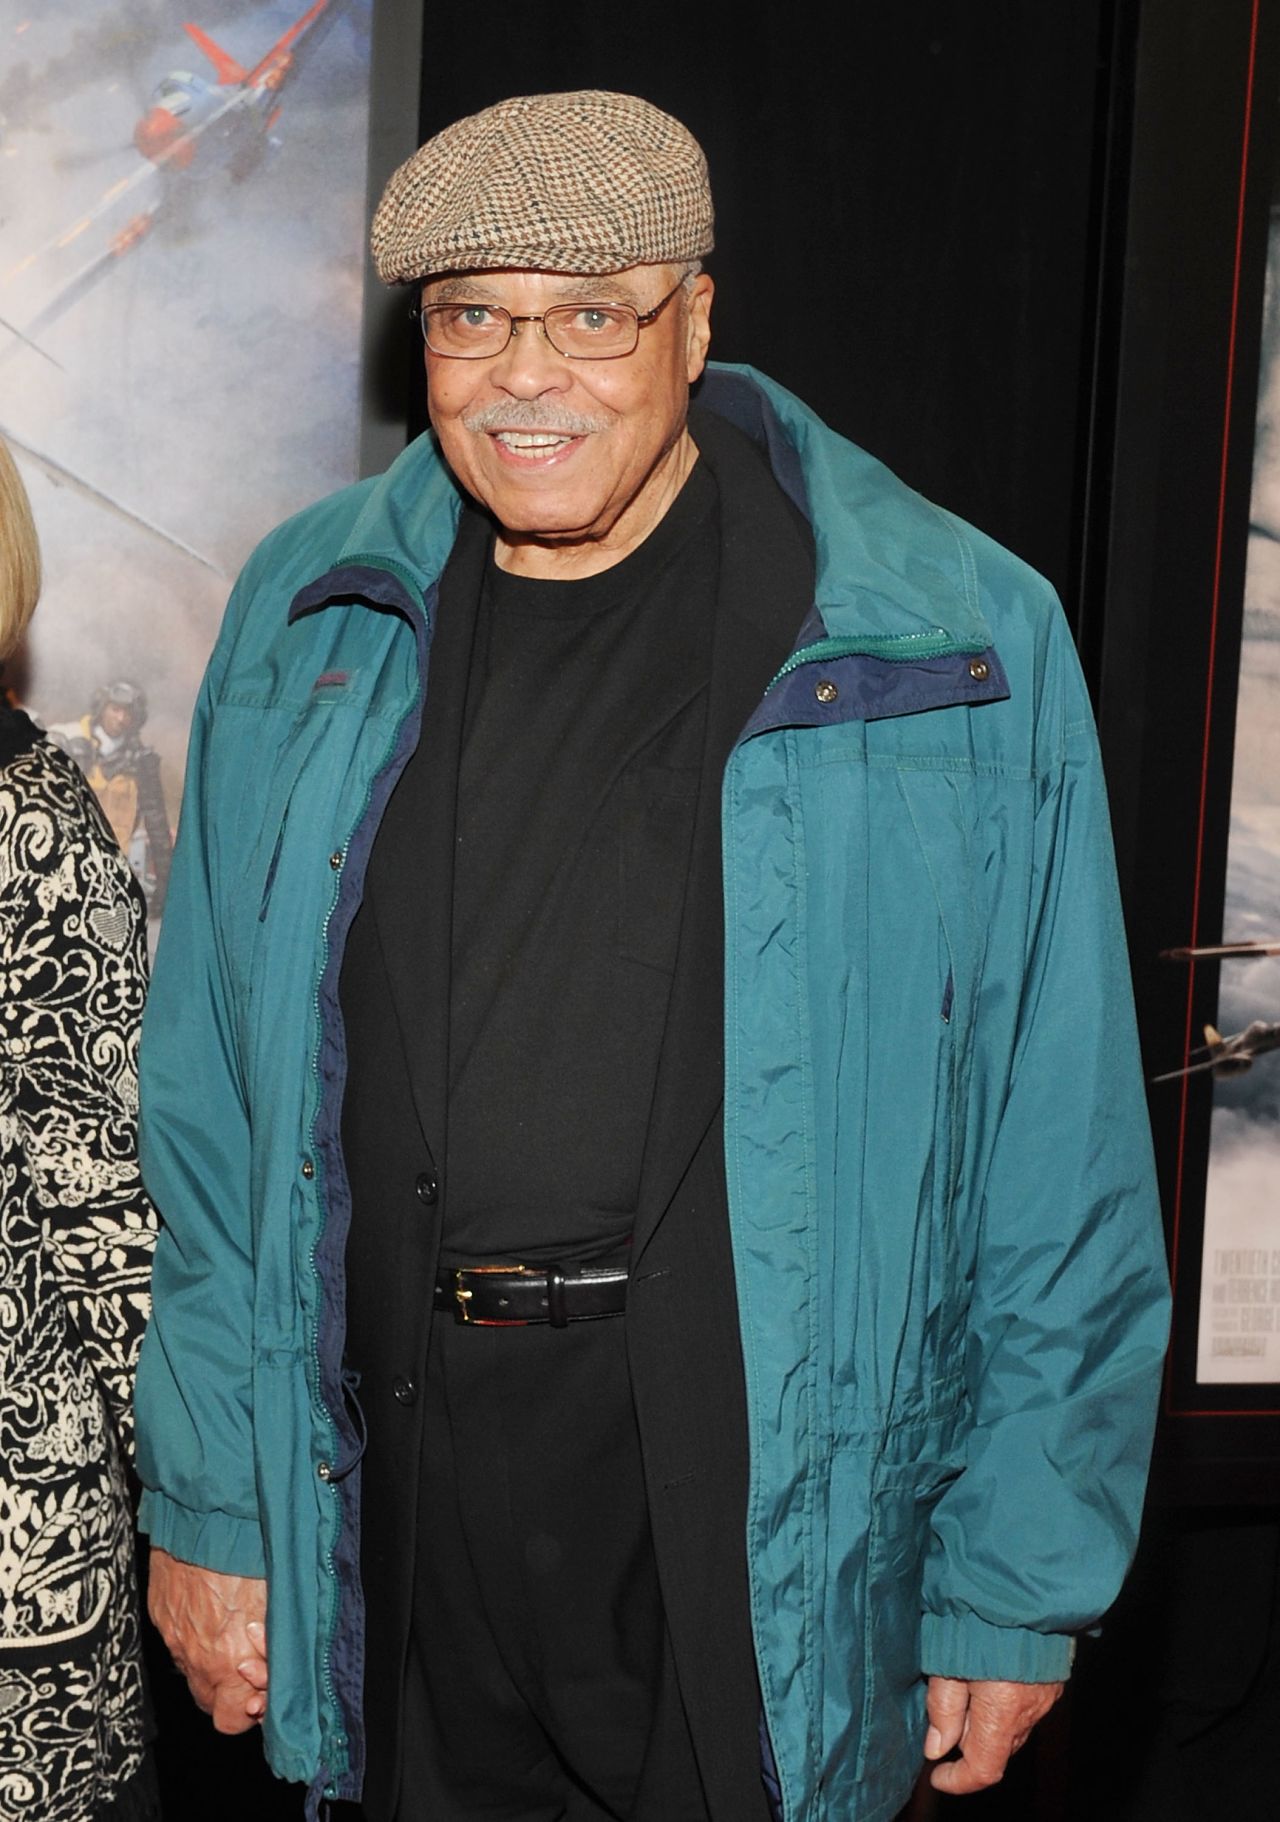 After voicing Darth Vader (played by David Prowse), James Earl Jones went on to lend his voice to video games, TV series and films like 1994's "The Lion King." He'll next appear in "The Angriest Man in Brooklyn," due out in 2013.